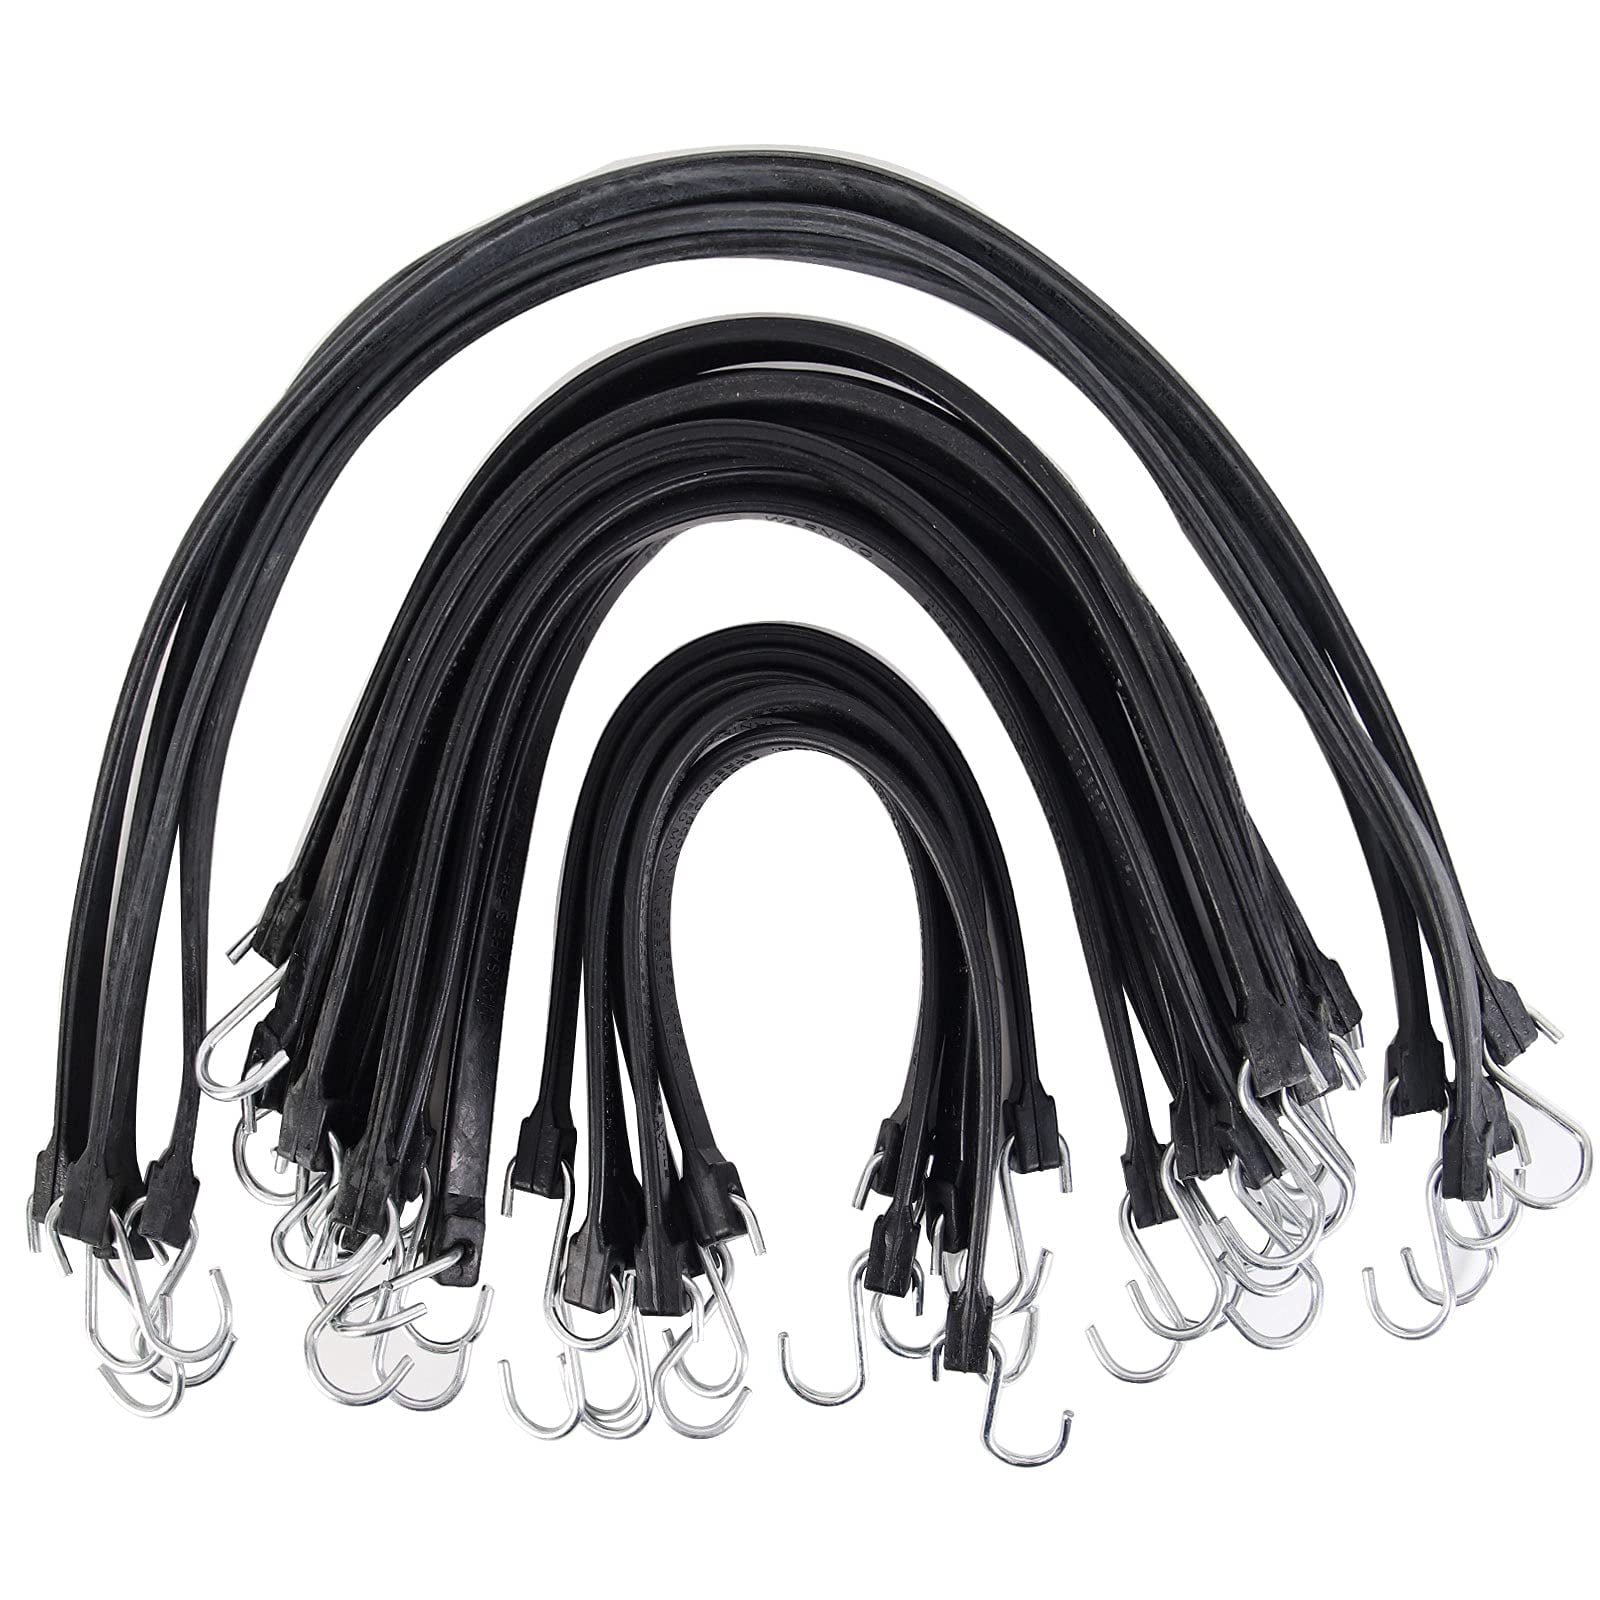 STAS Looped End Cord Clear Nylon - 20 pack Perlon Picture Cable Wire For  Picture Hanging Hooks and Picture Rails 59 length, 2mm diameter 